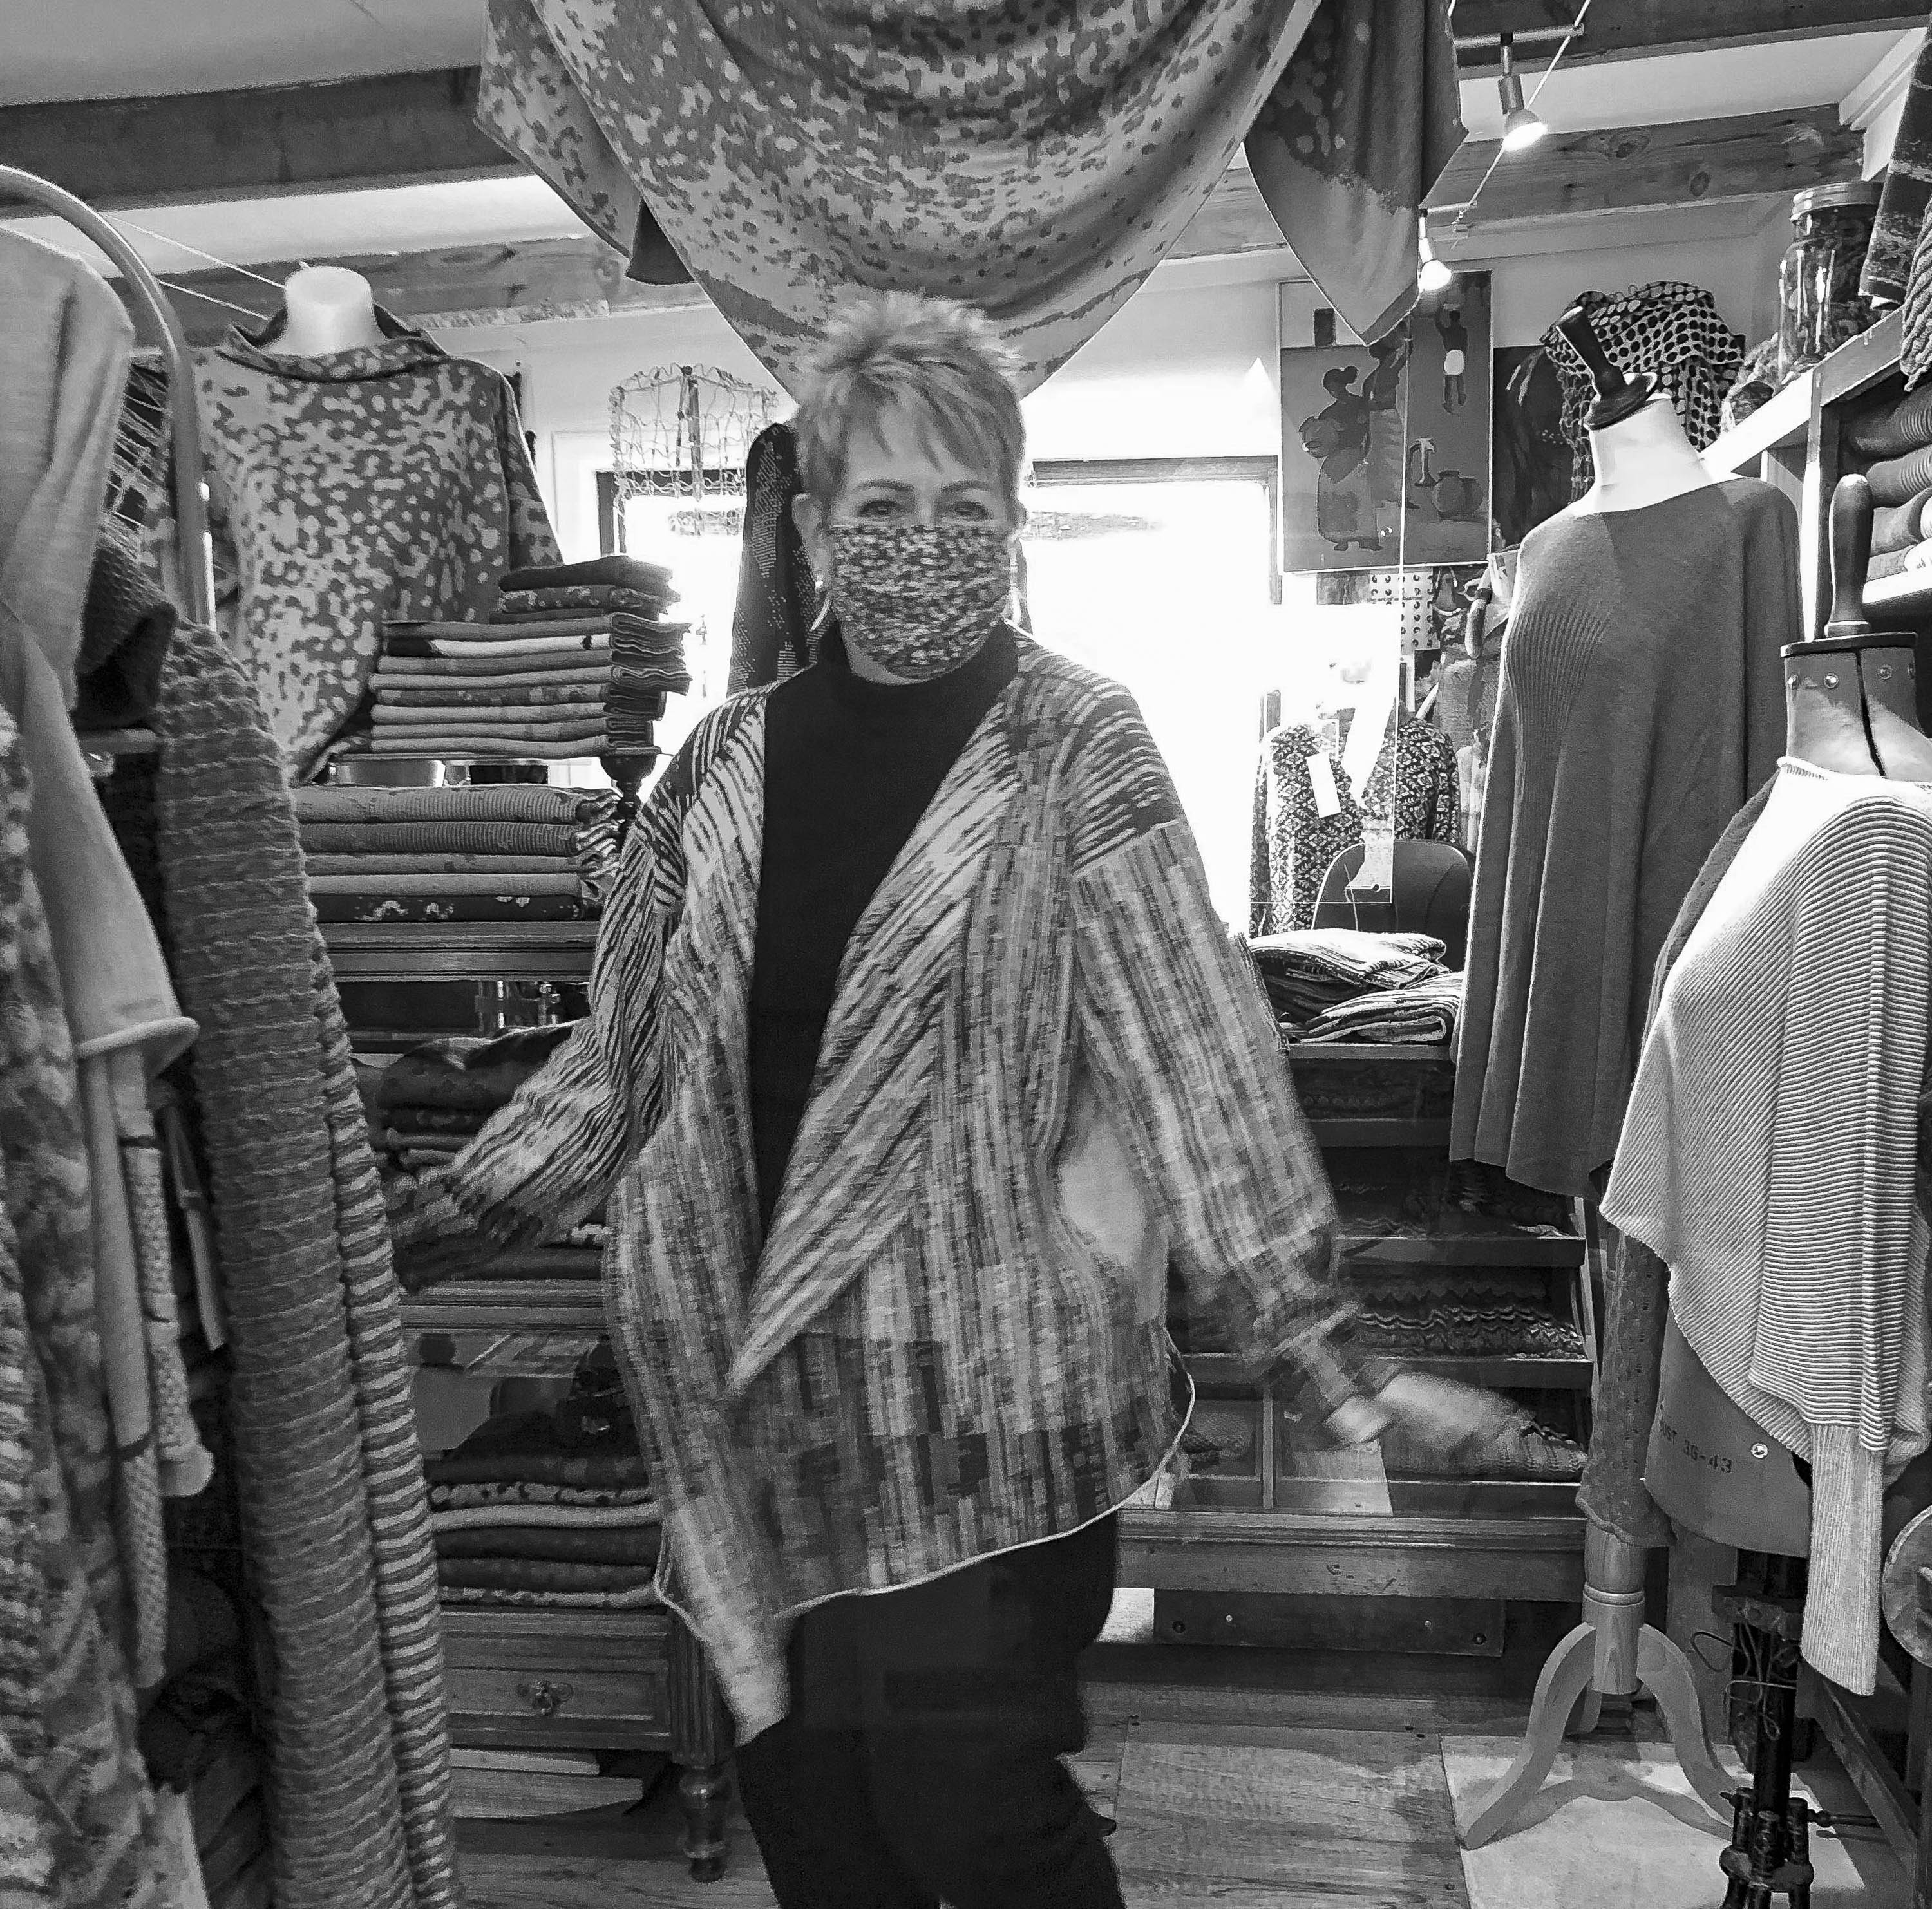 In the Nielanell knitwear studio, Hoswick, a woman wears an abstract, linear pattern knitted jacket. contemporary in style and with wide lapels